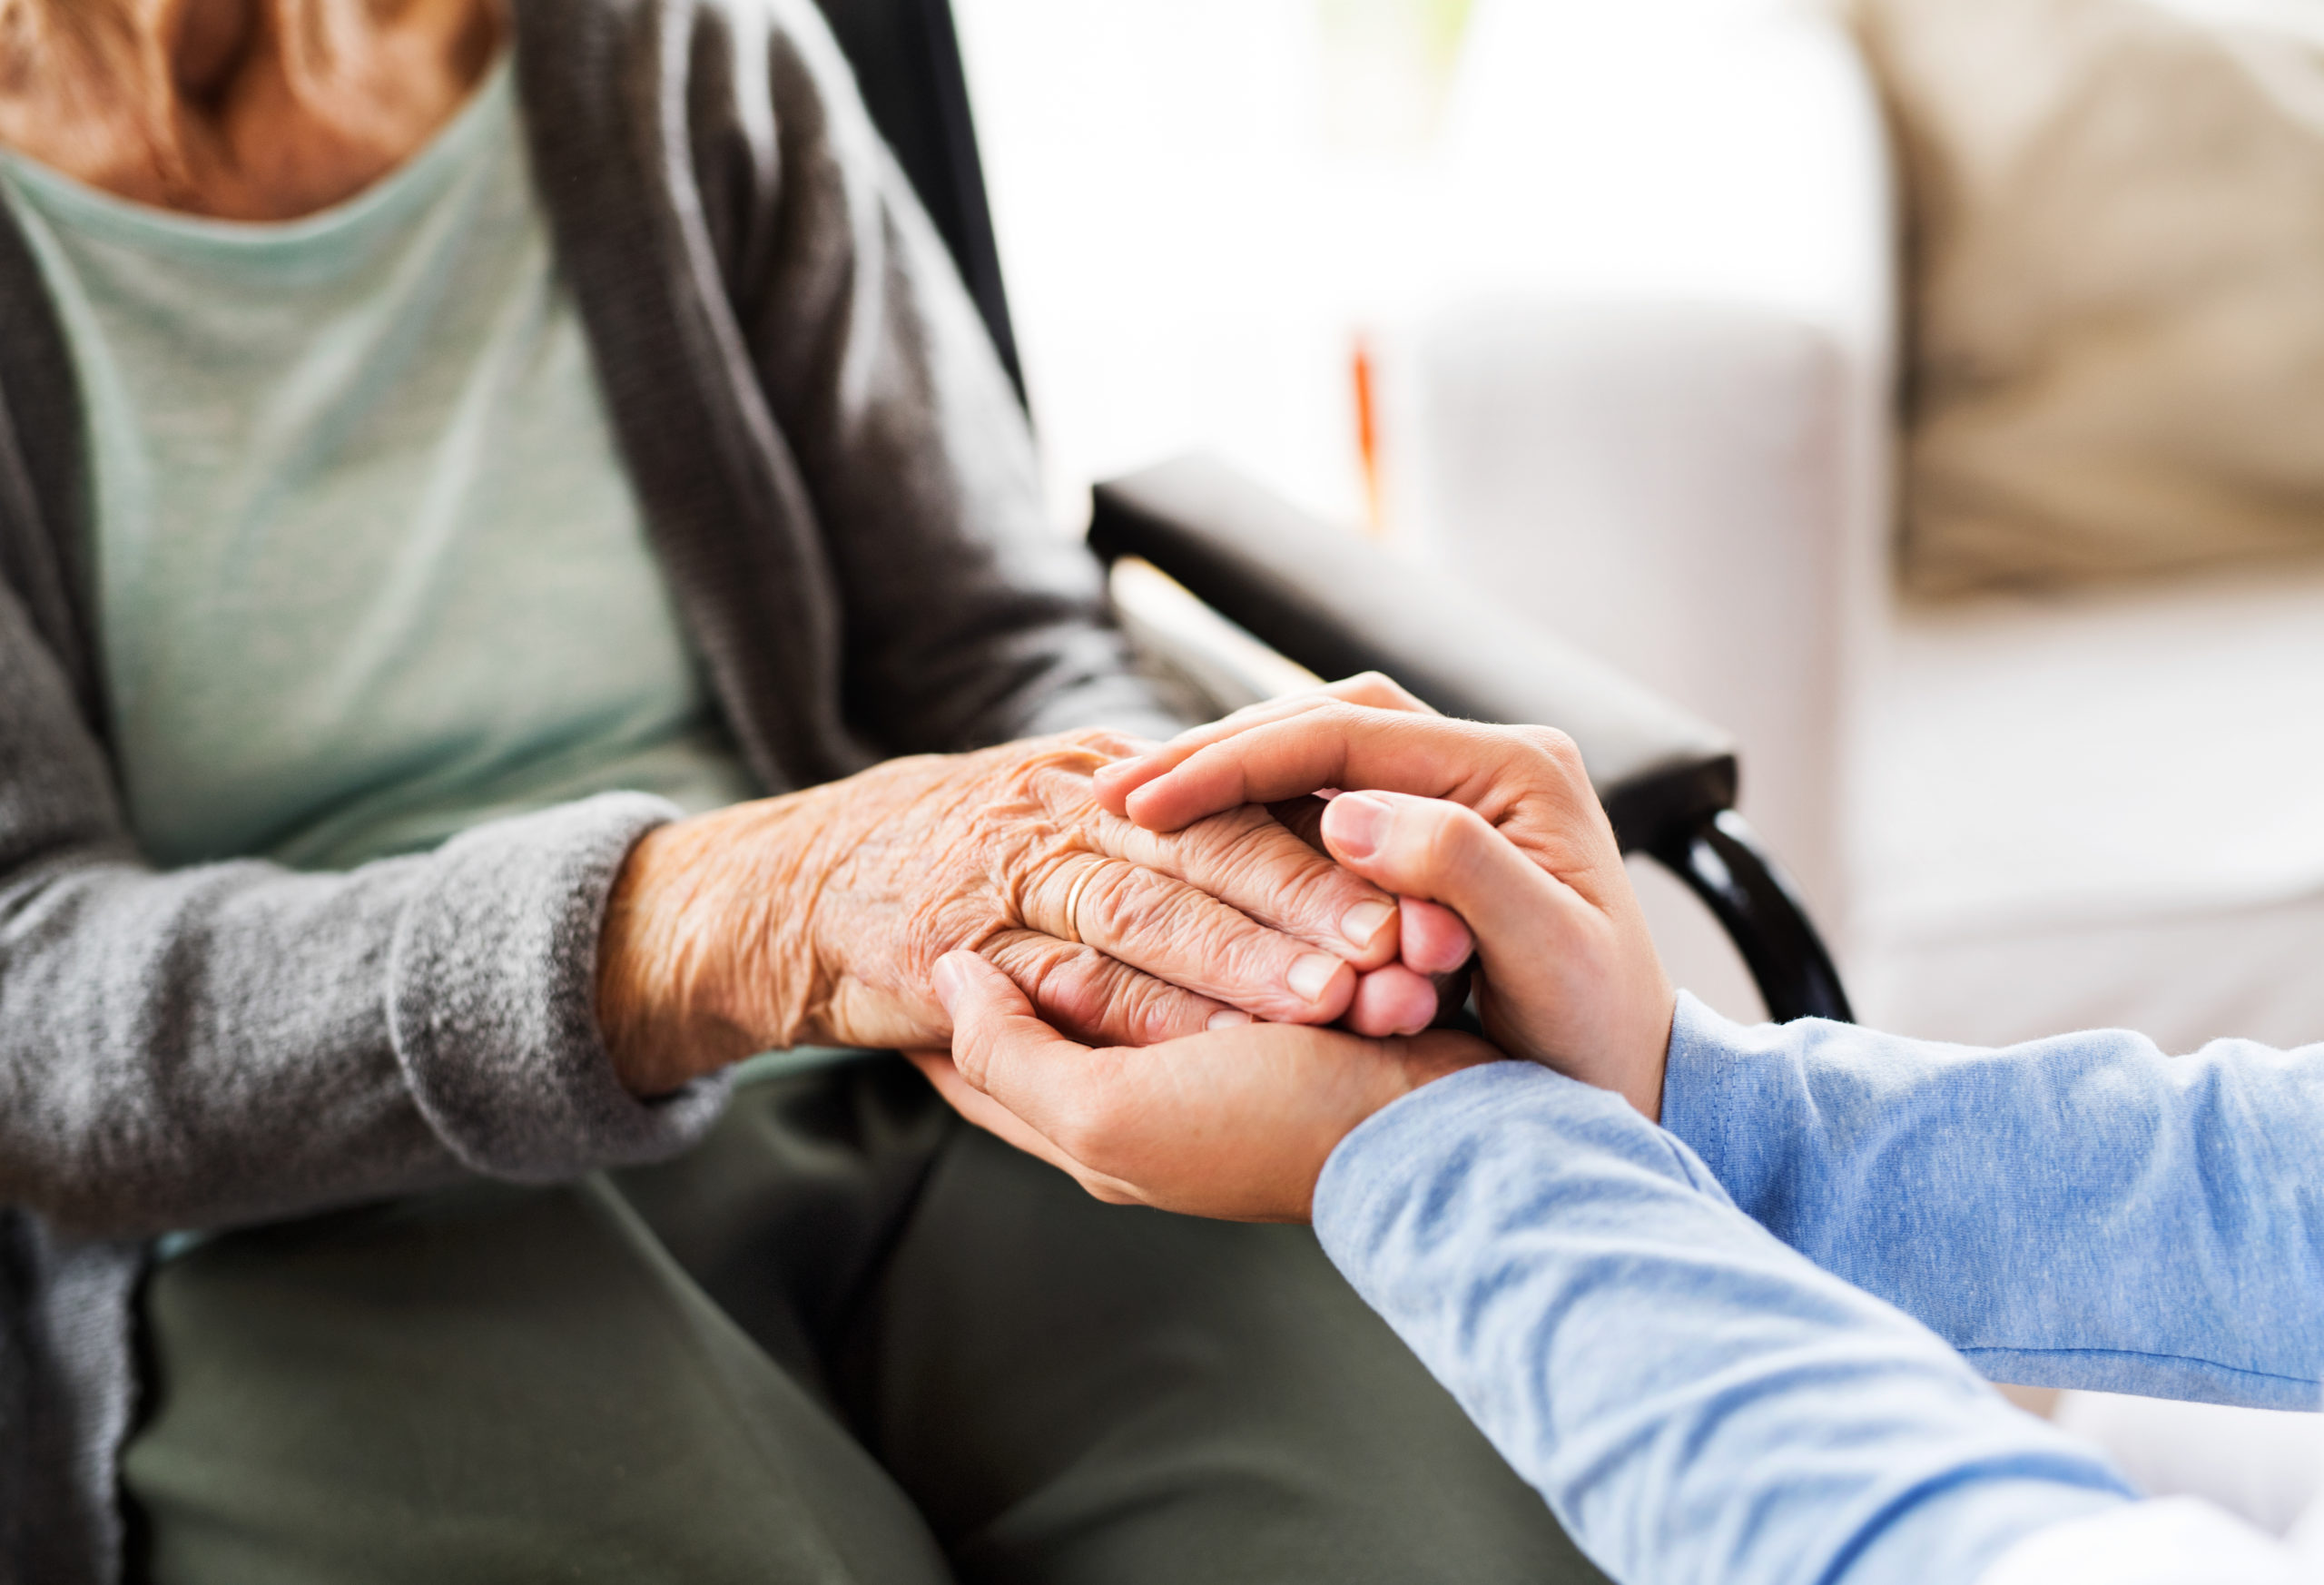 How intranets can support Care homes